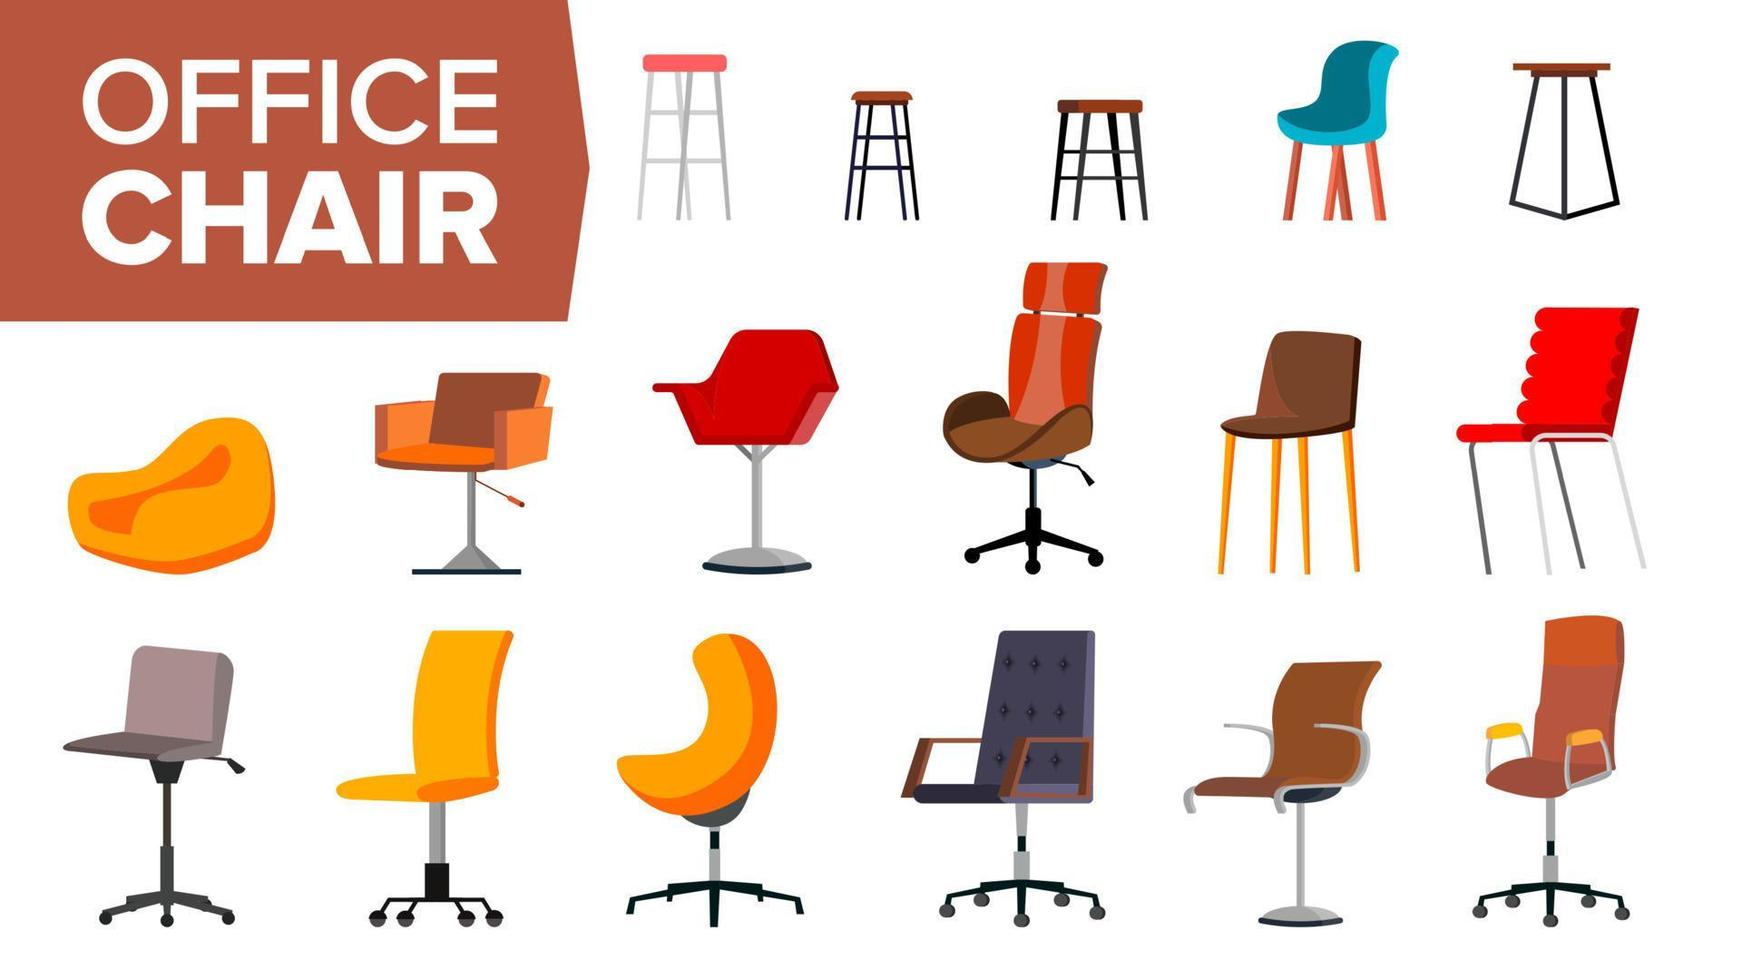 Chair Set Vector. Office Creative Modern Desk Chairs. Interior Seat Design Element. Flat Isolated Furniture Illustration vector